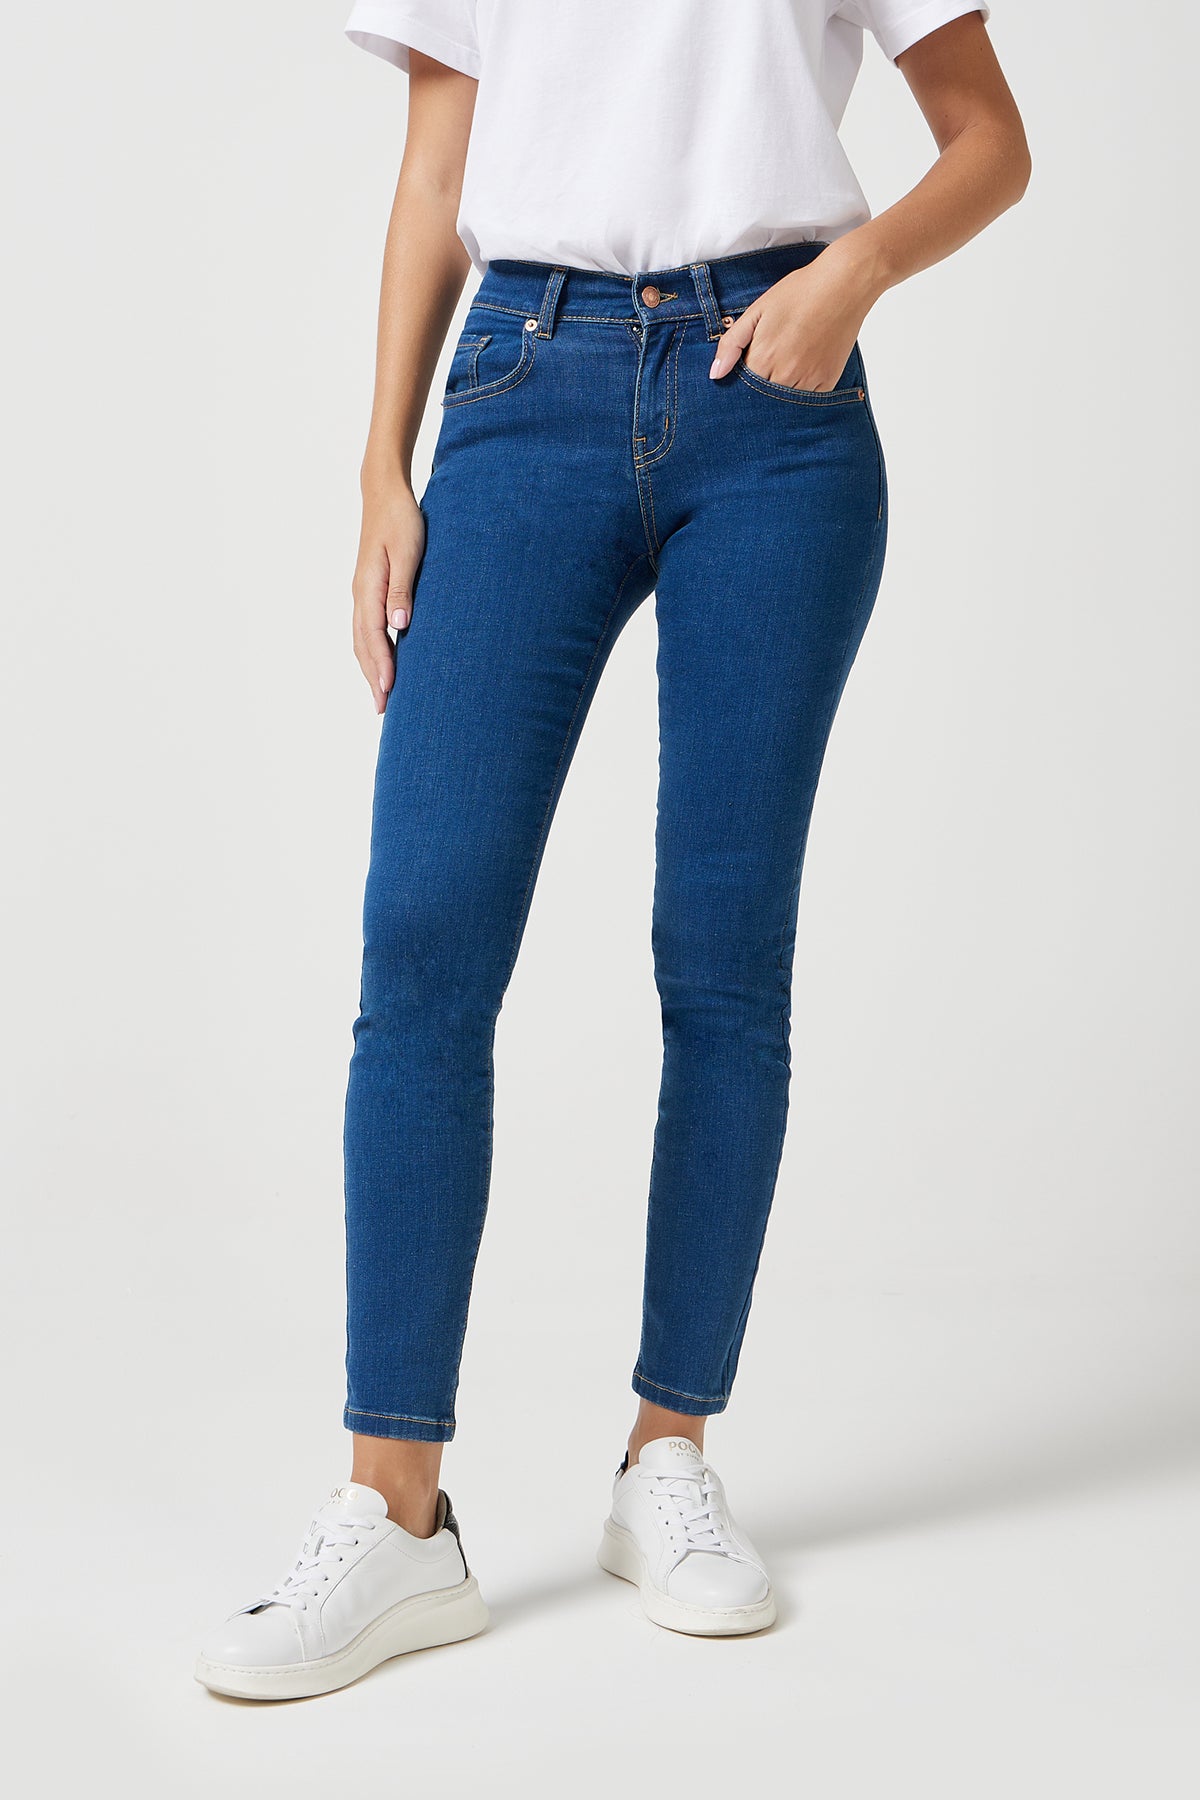 The Mid Rise Skinny Clean Blue